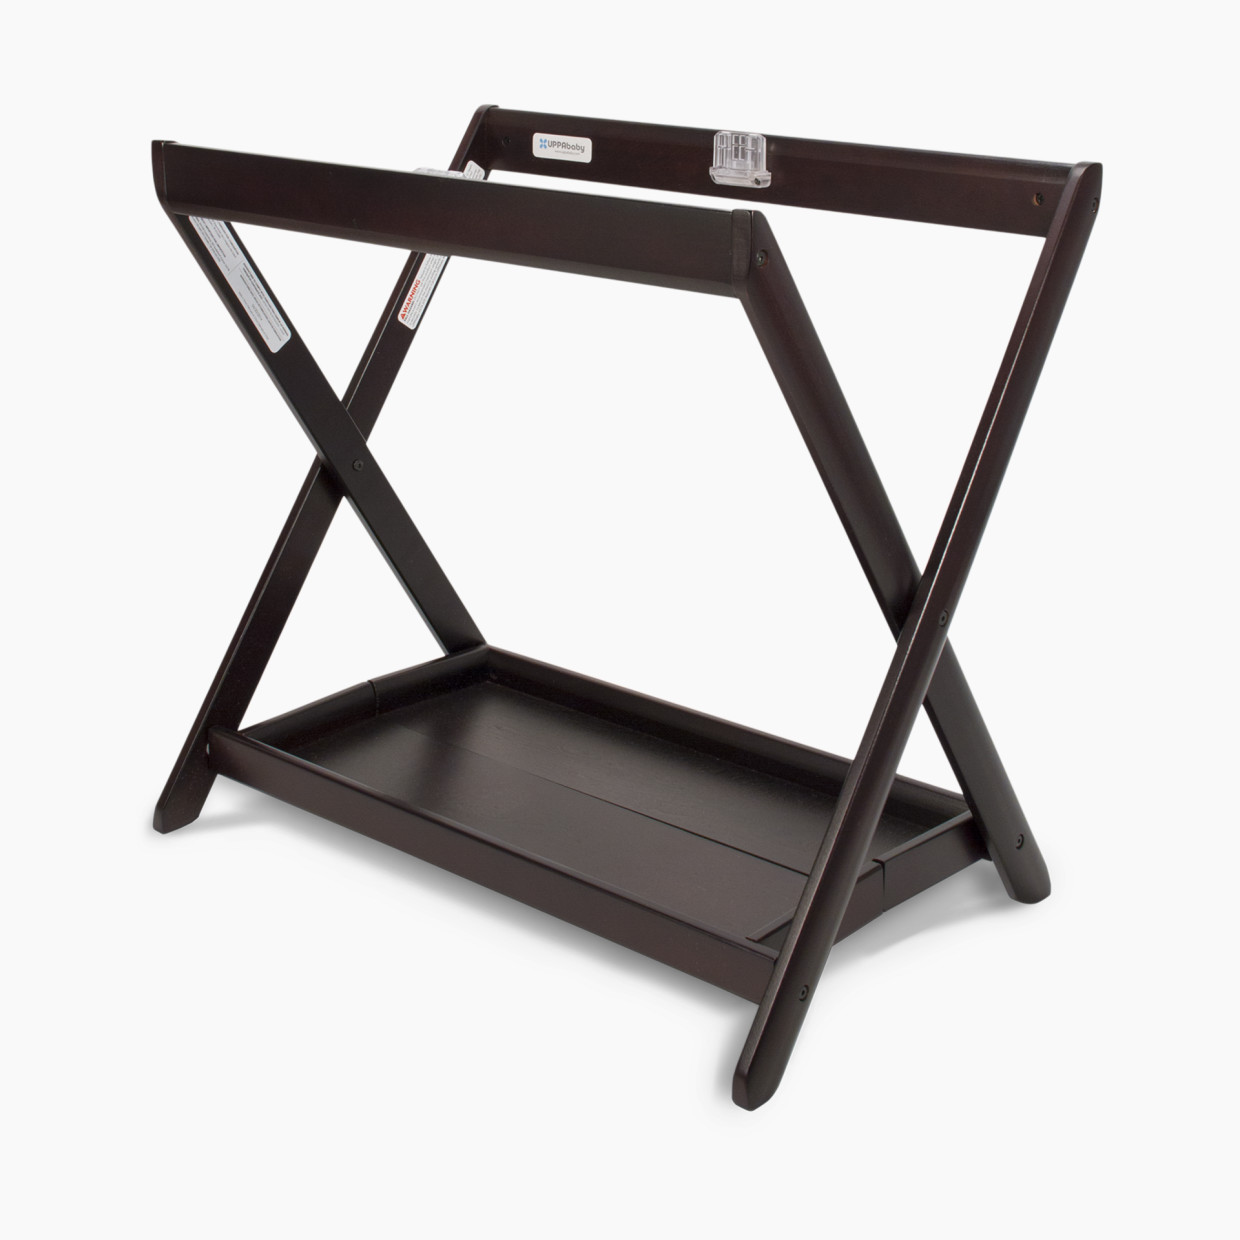 UPPAbaby Bassinet Stand for UPPAbaby Bassinets - Espresso.